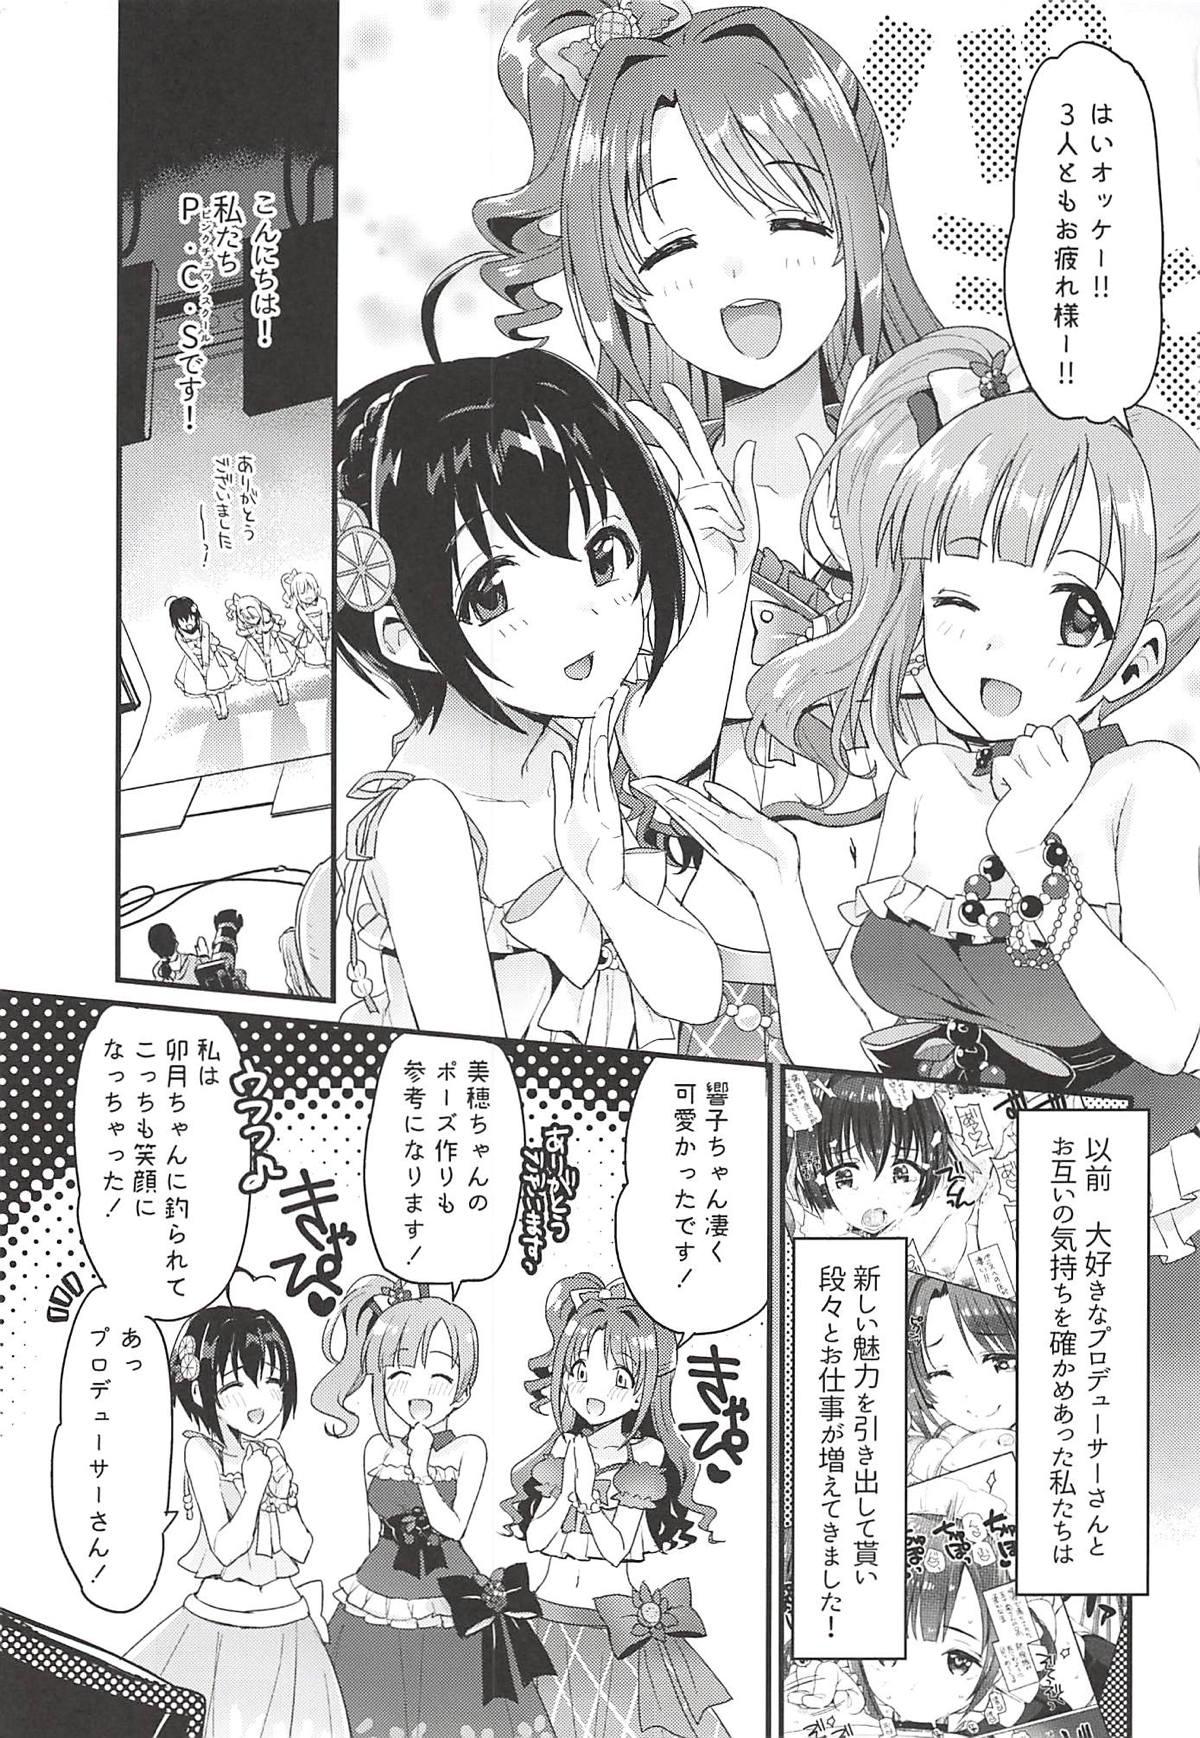 Spain Pure Cream Shortcakes 2 - The idolmaster Consolo - Page 2